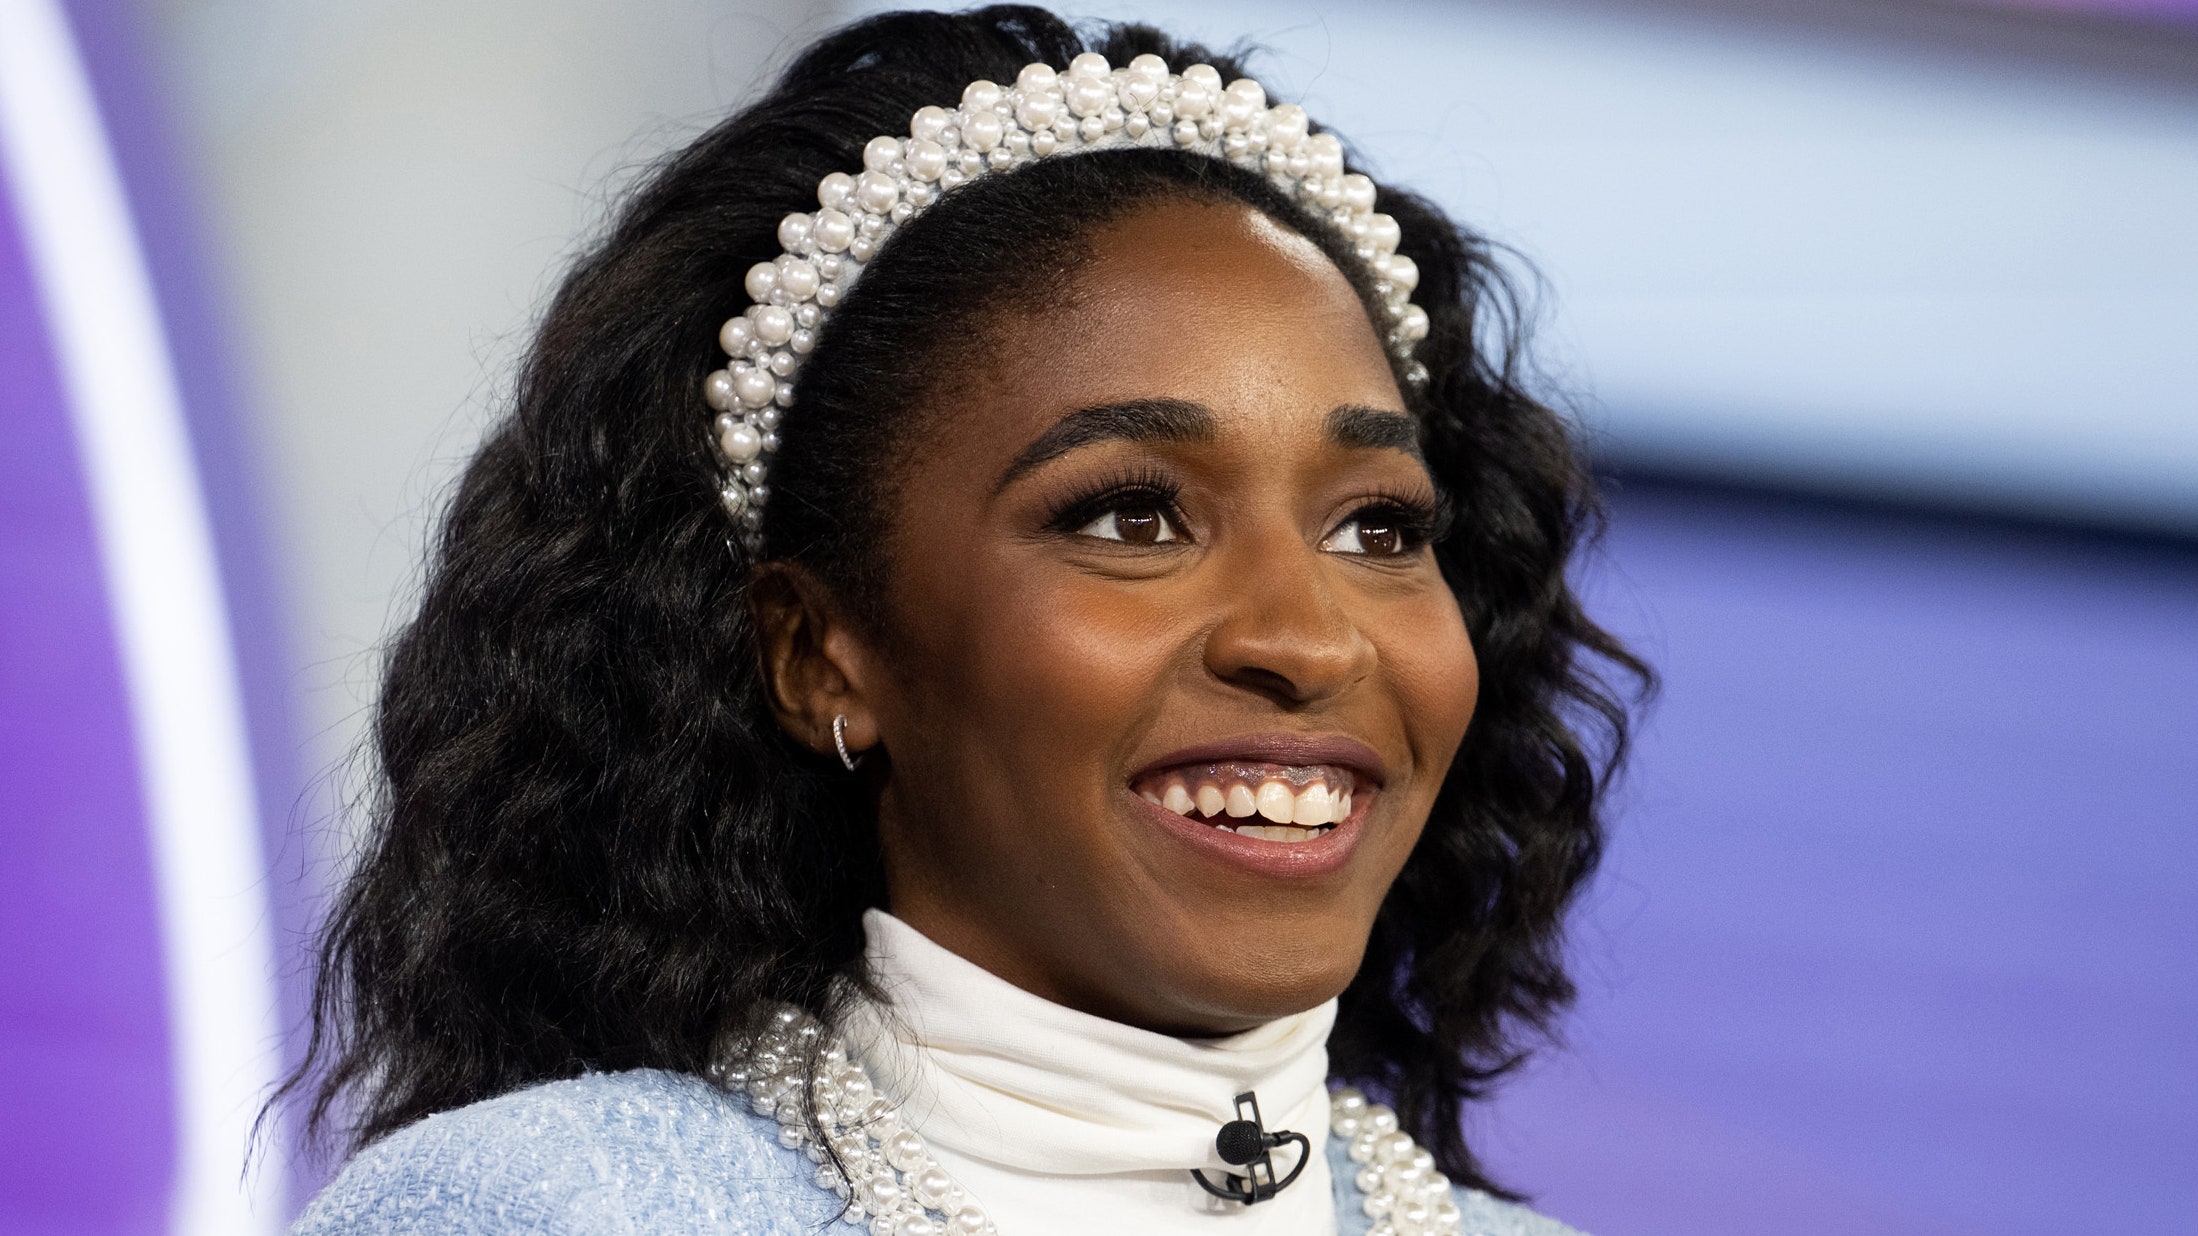 Ayo Edebiri appears at an event in a blue jacket and curls with a pearl headband.